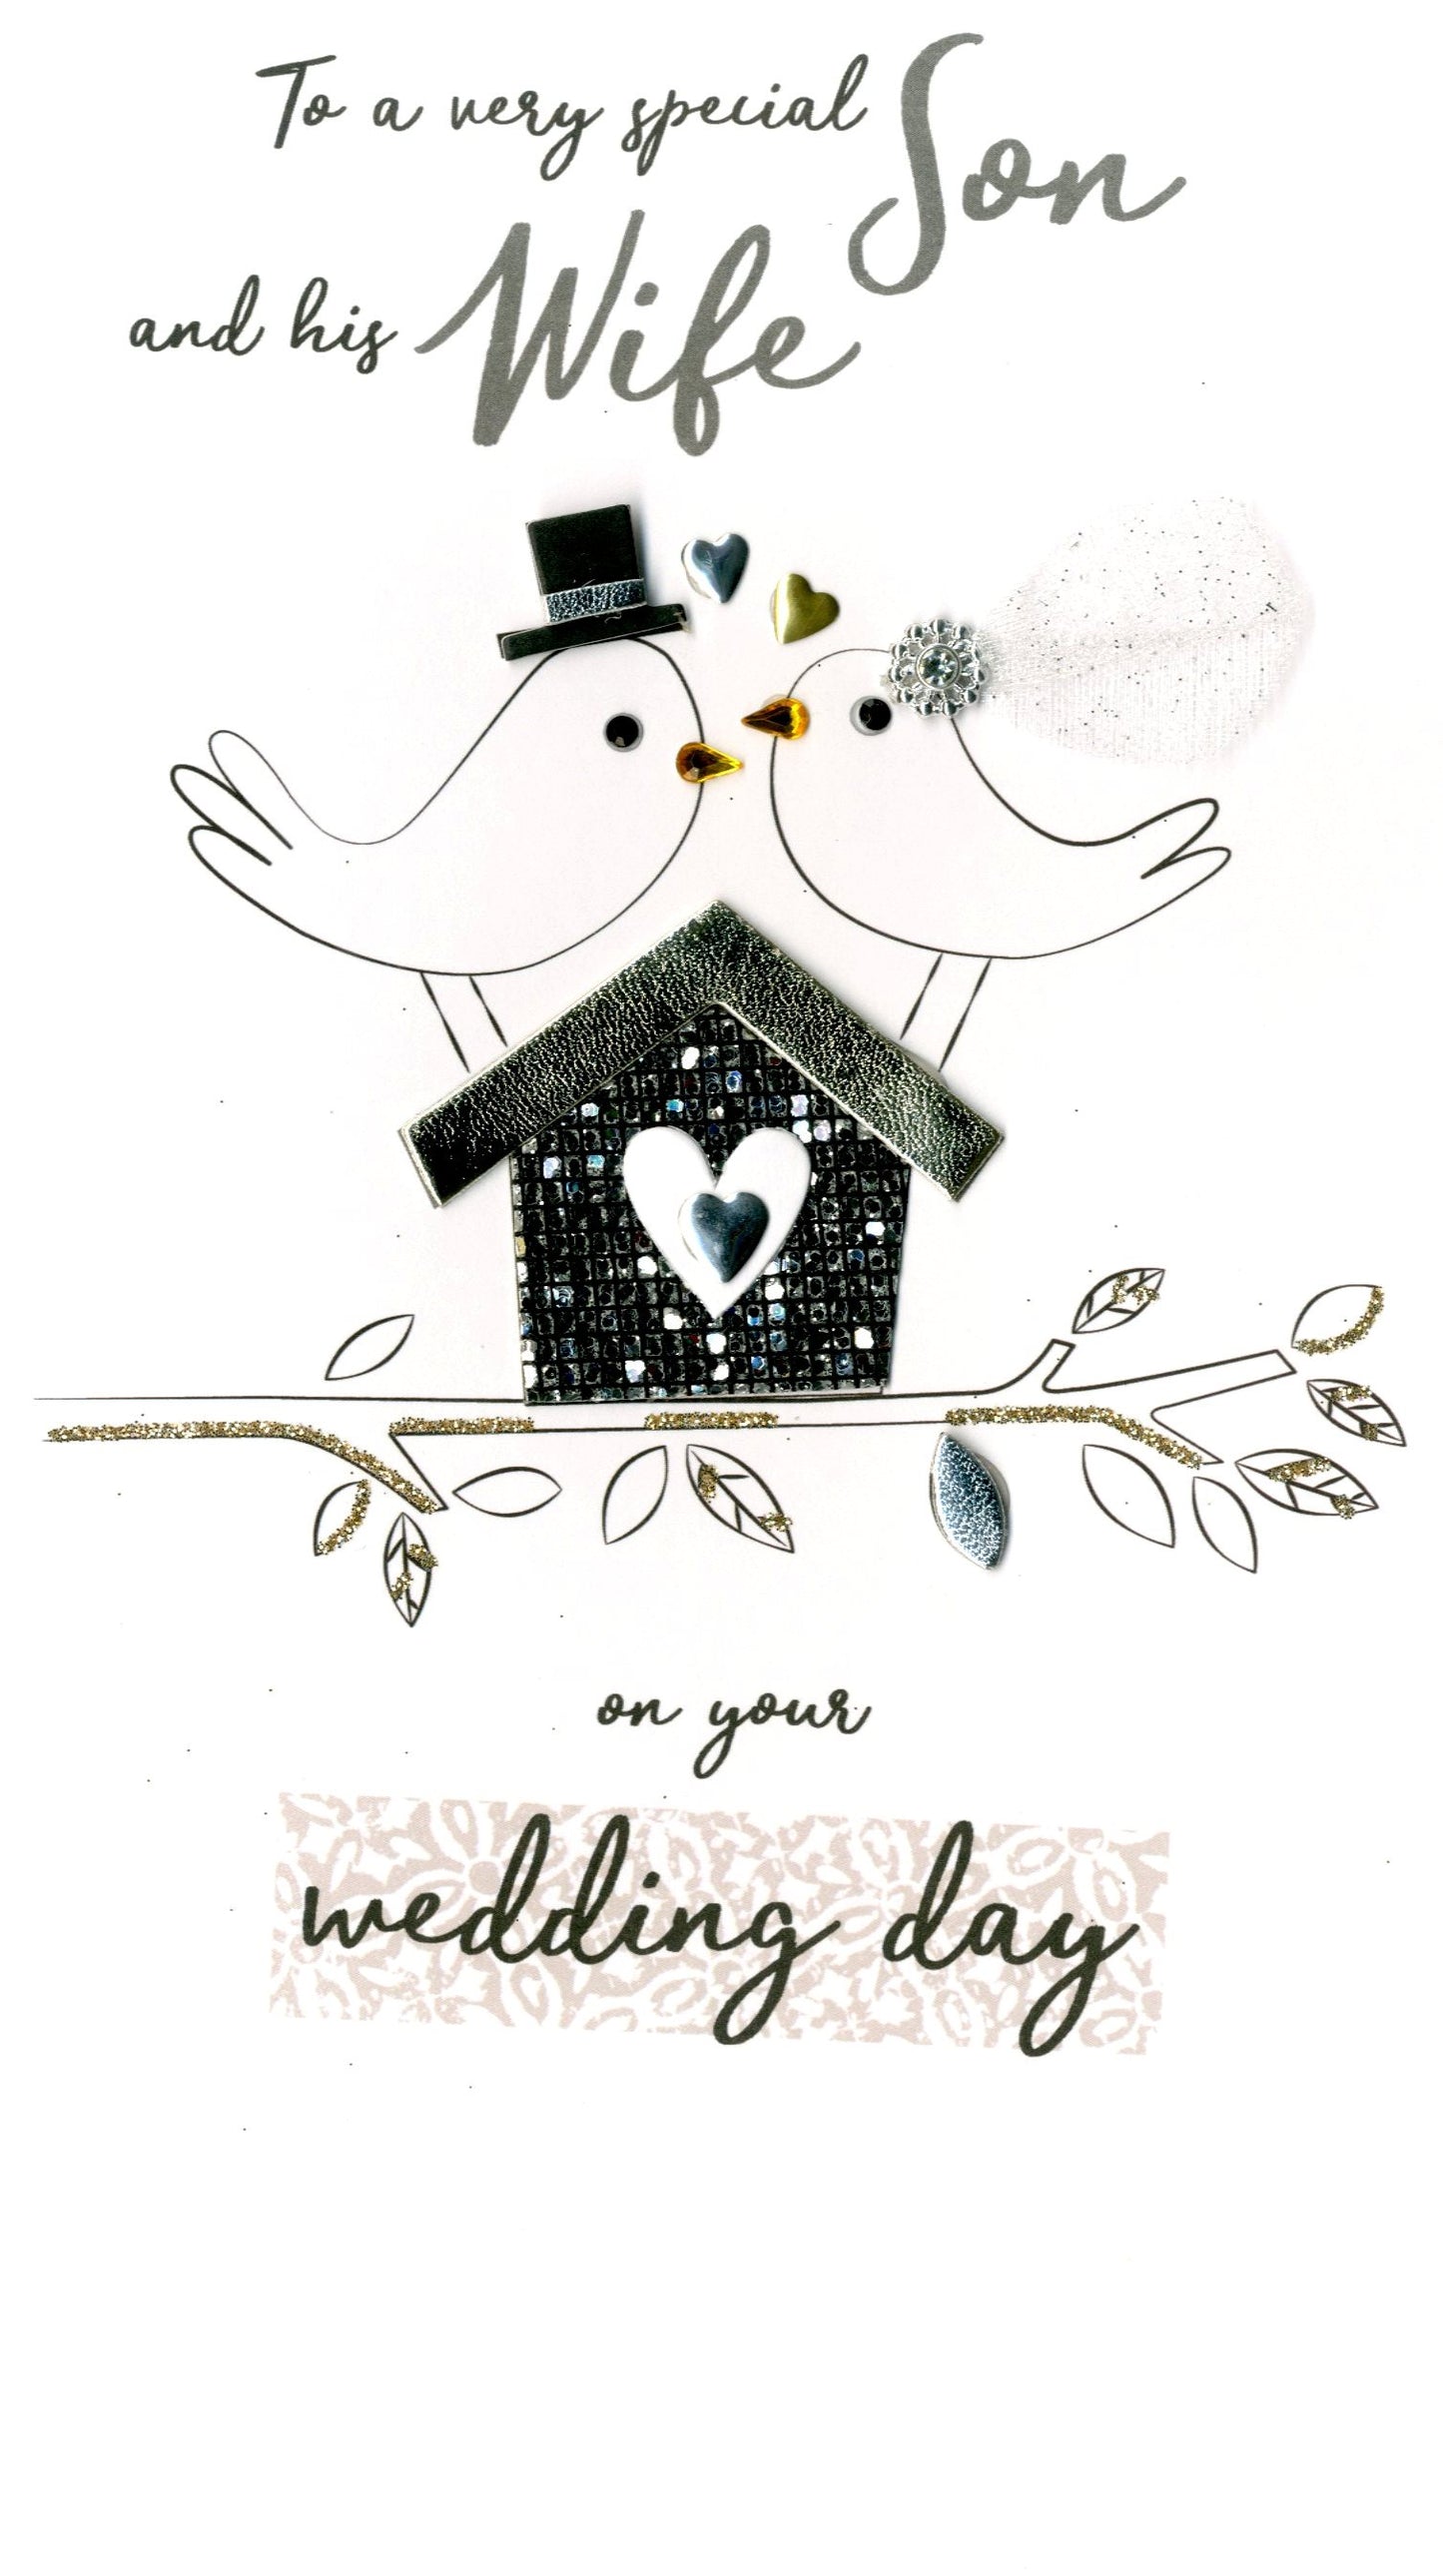 Son & Wife Wedding  Greeting Card Hand-Finished